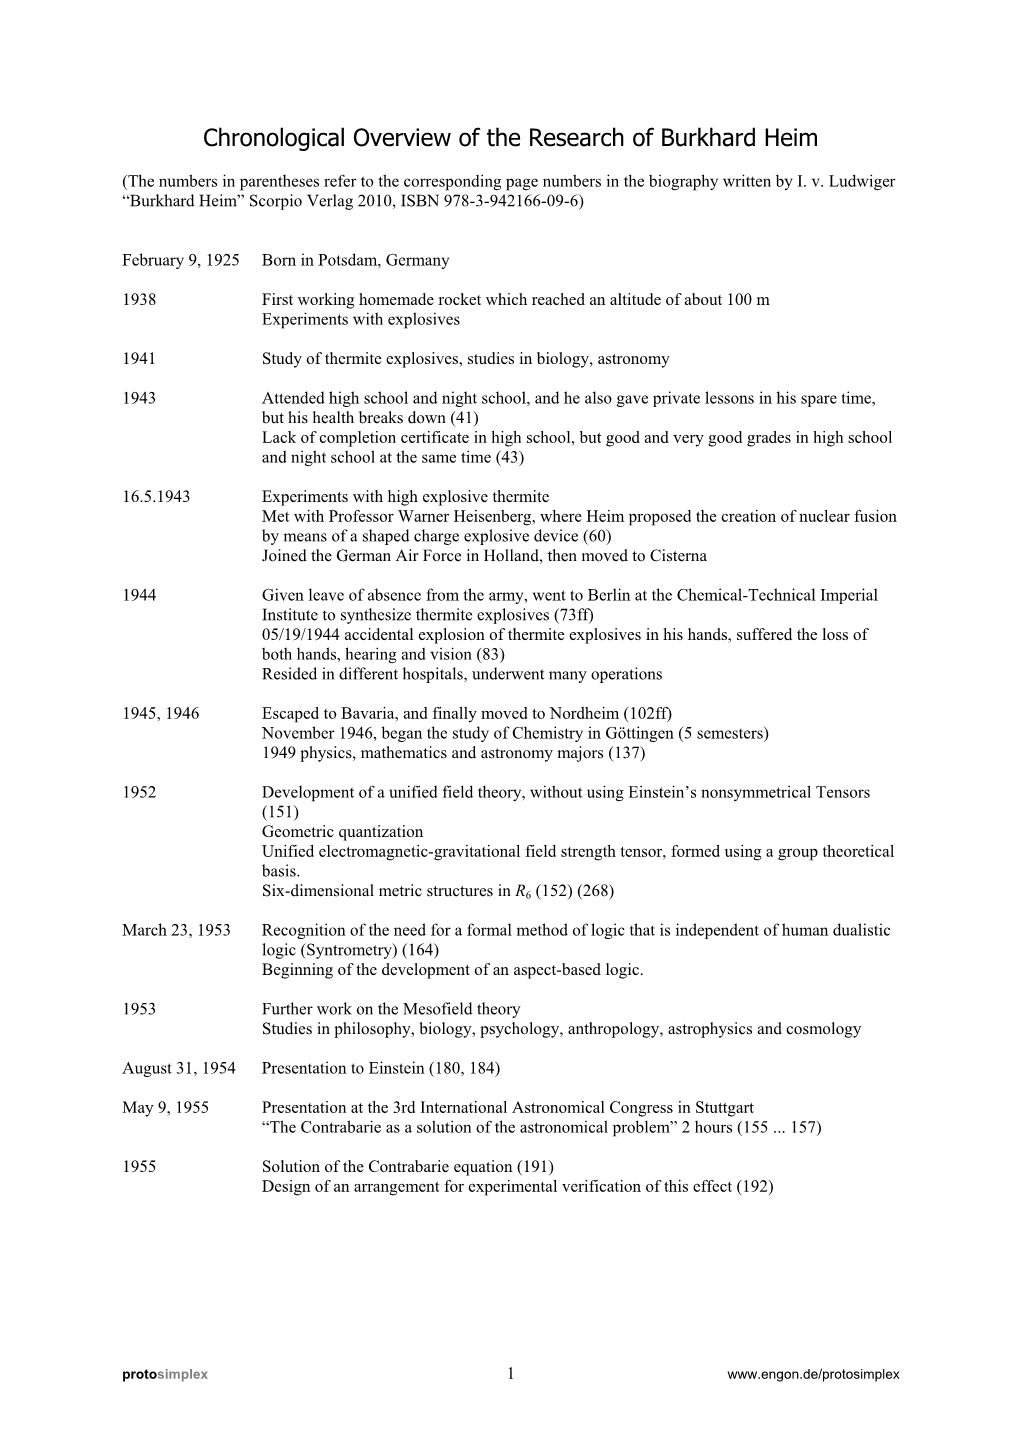 Chronological Overview of the Research of Burkhard Heim